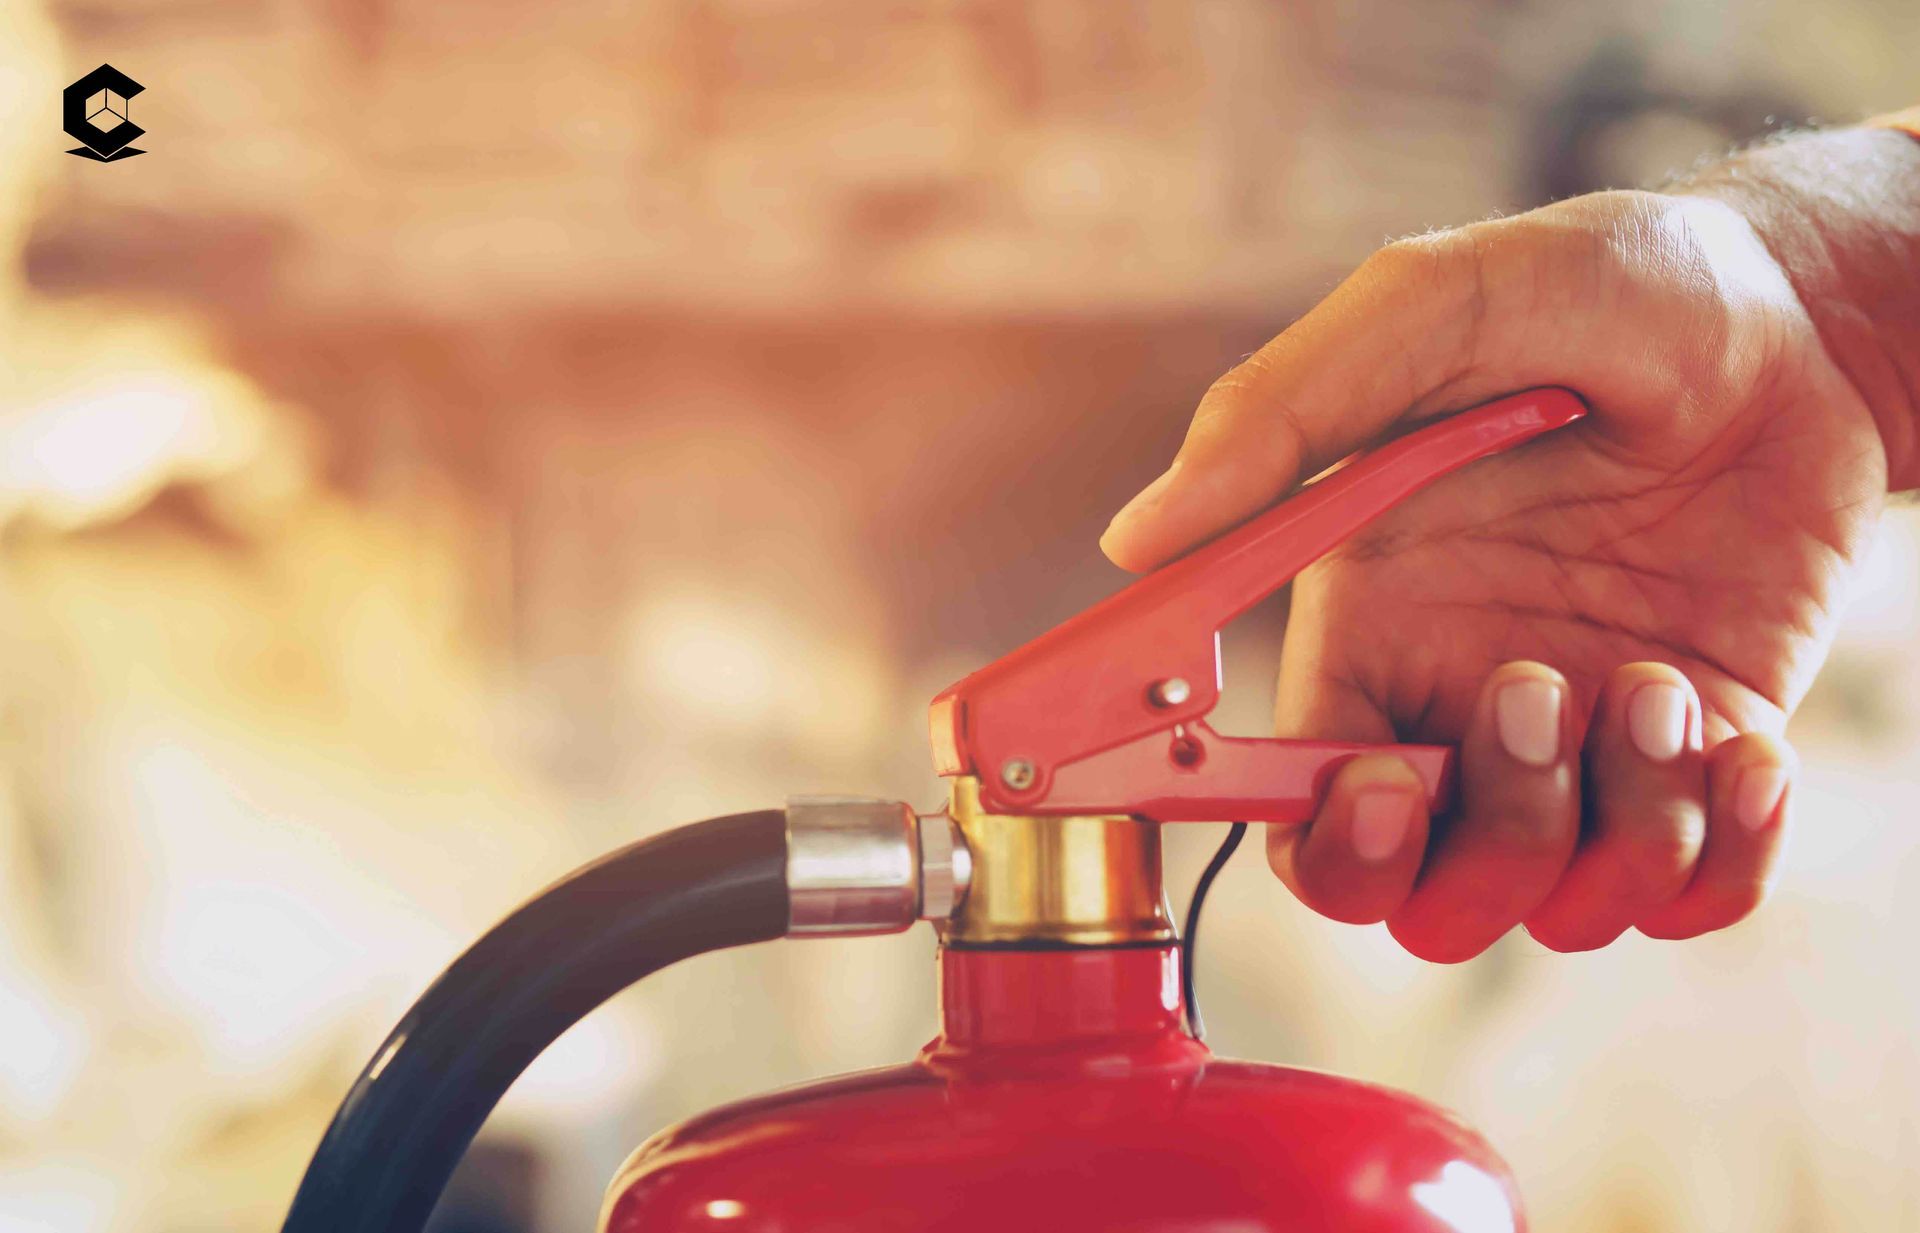 a person is holding a red fire extinguisher in their hand